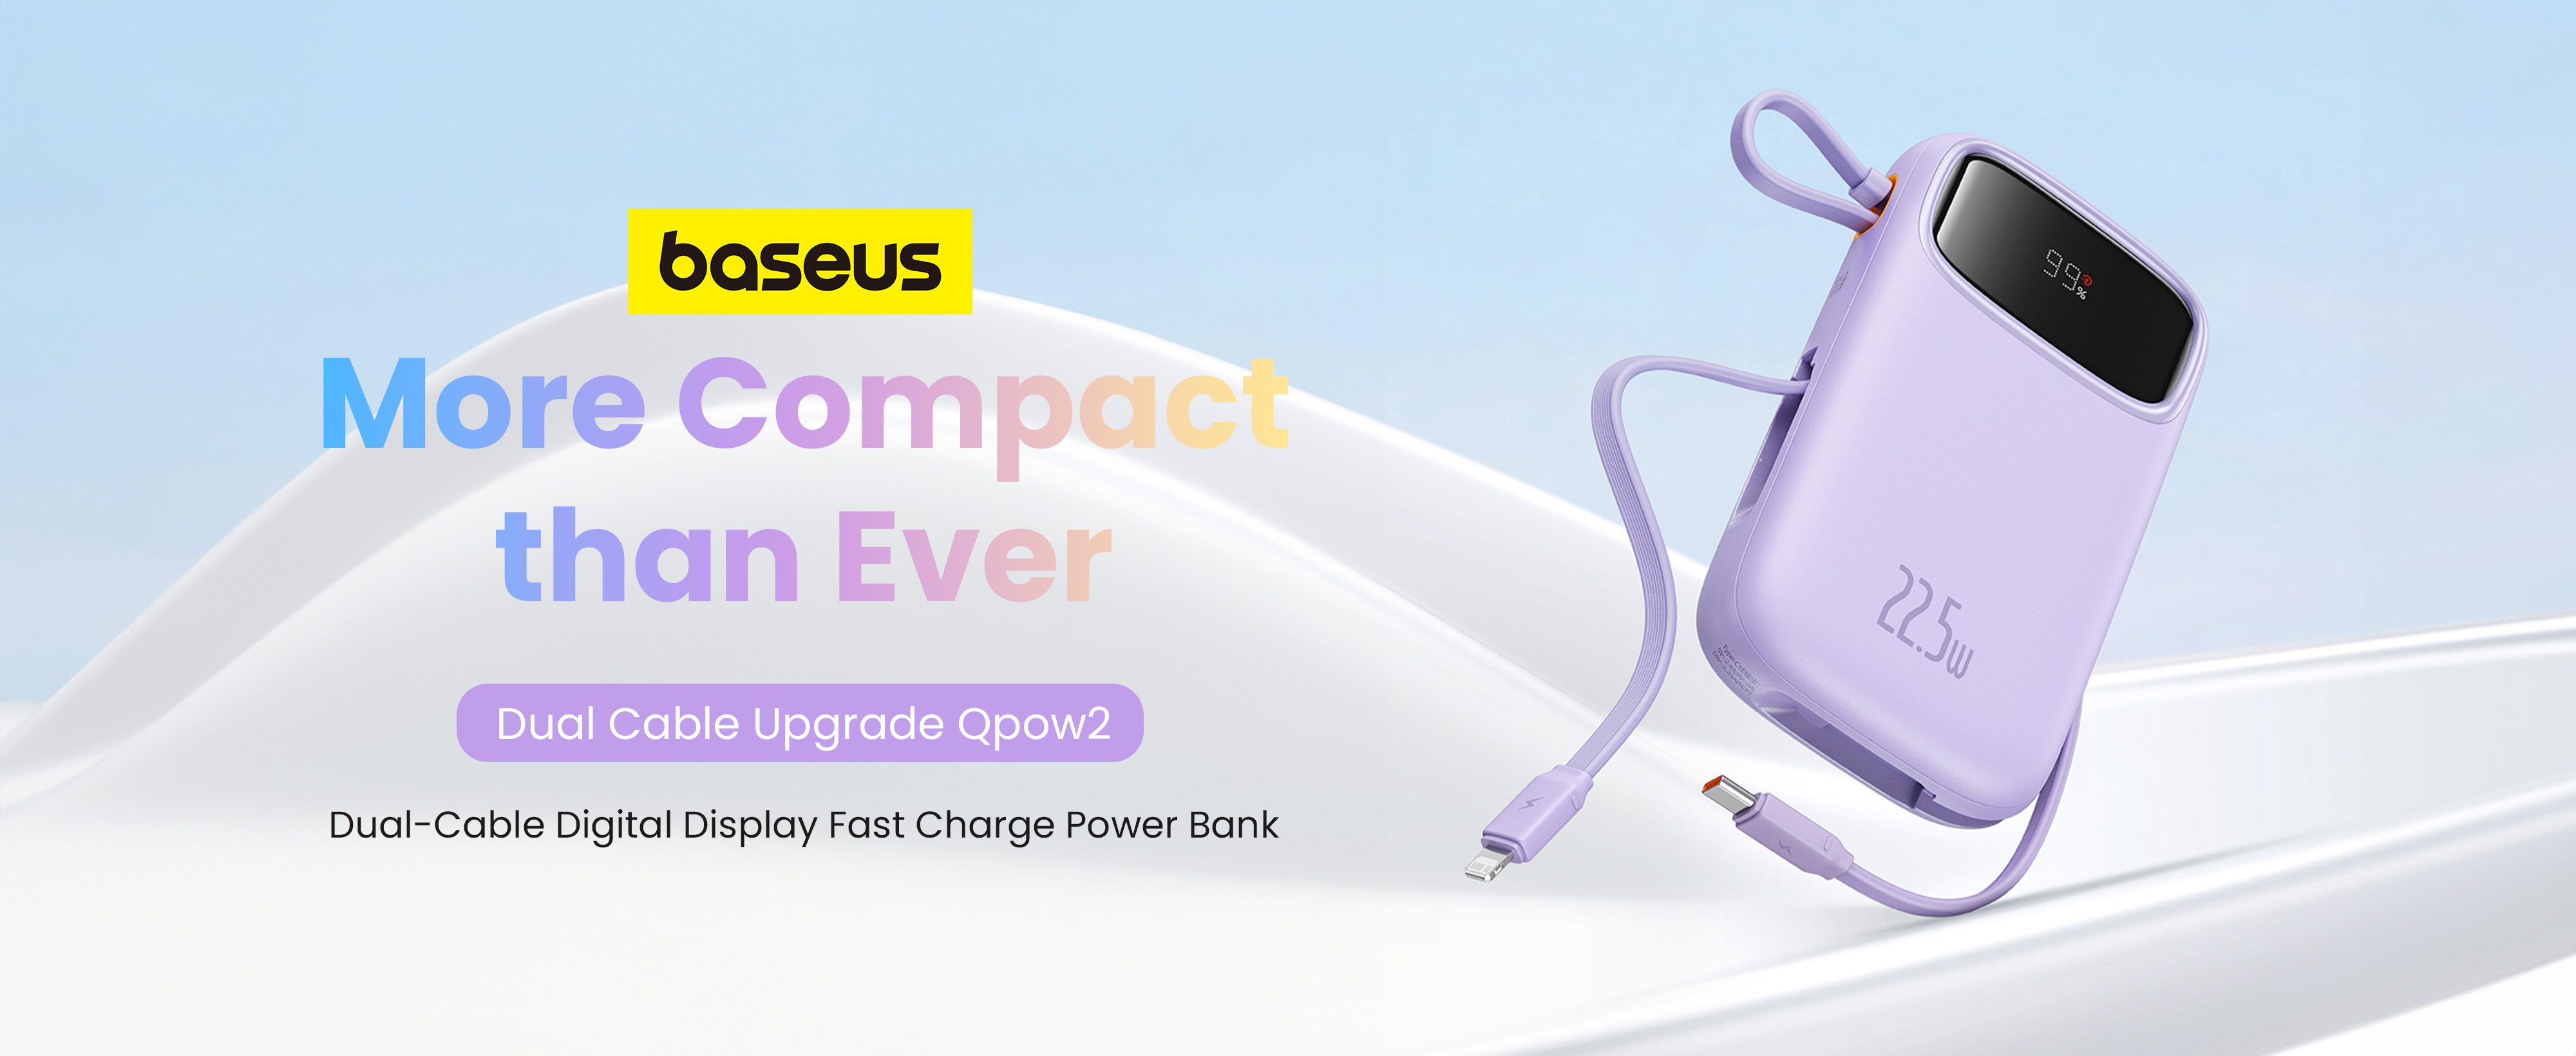 Baseus QPow2 20000mAh Digital Display Fast Charge Power Bank 22.5W With Built-in Dual-Cable Lightning And Type-C